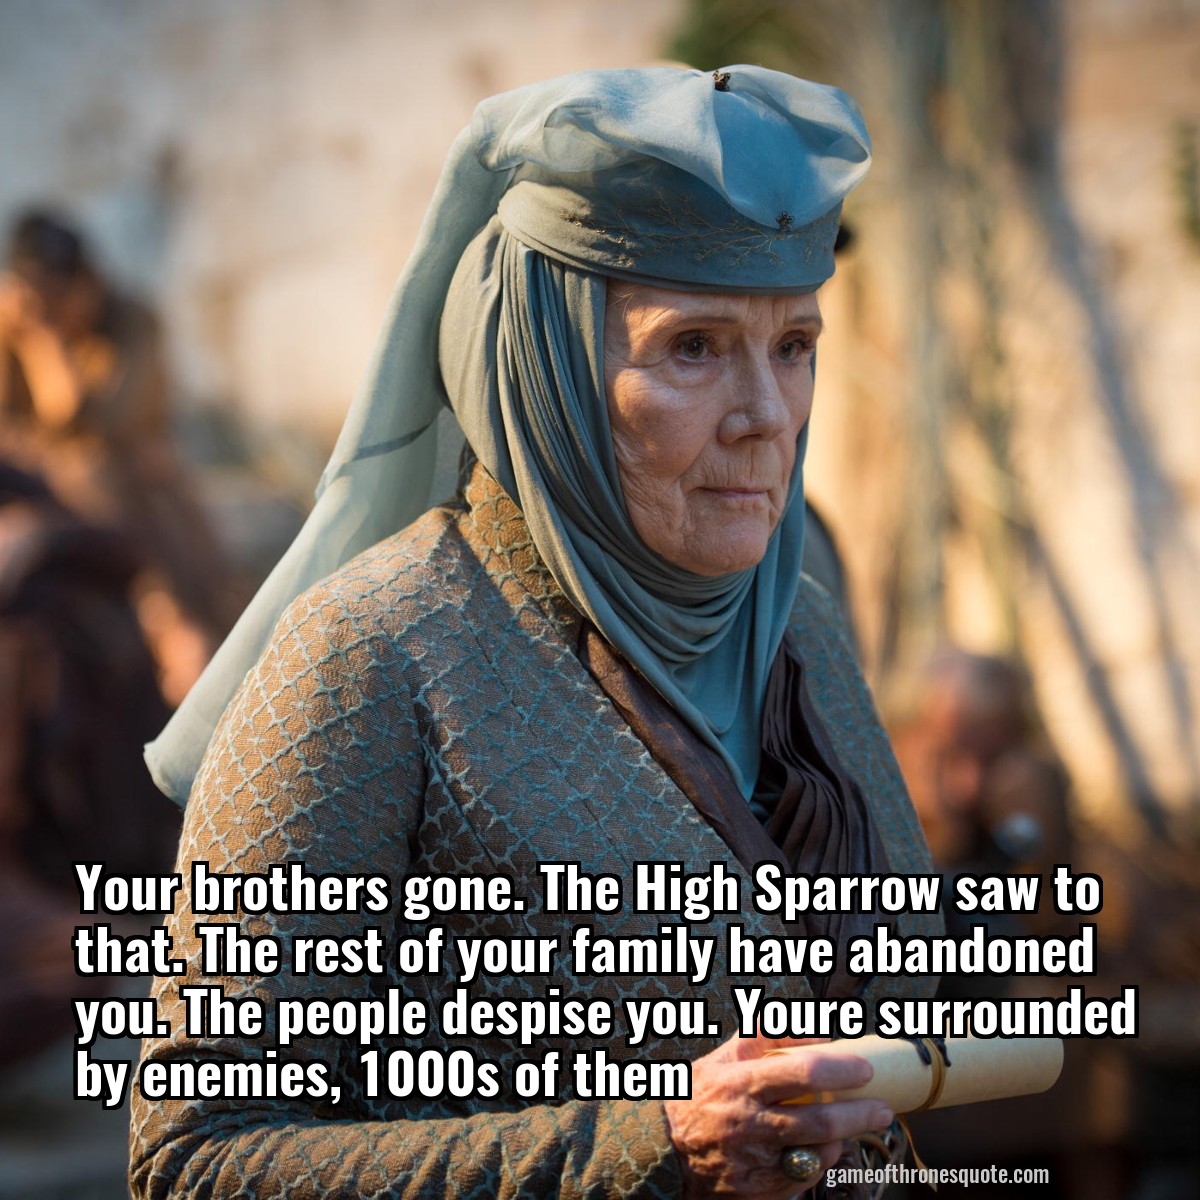 Your brothers gone. The High Sparrow saw to that. The rest of your family have abandoned you. The people despise you. Youre surrounded by enemies, 1000s of them